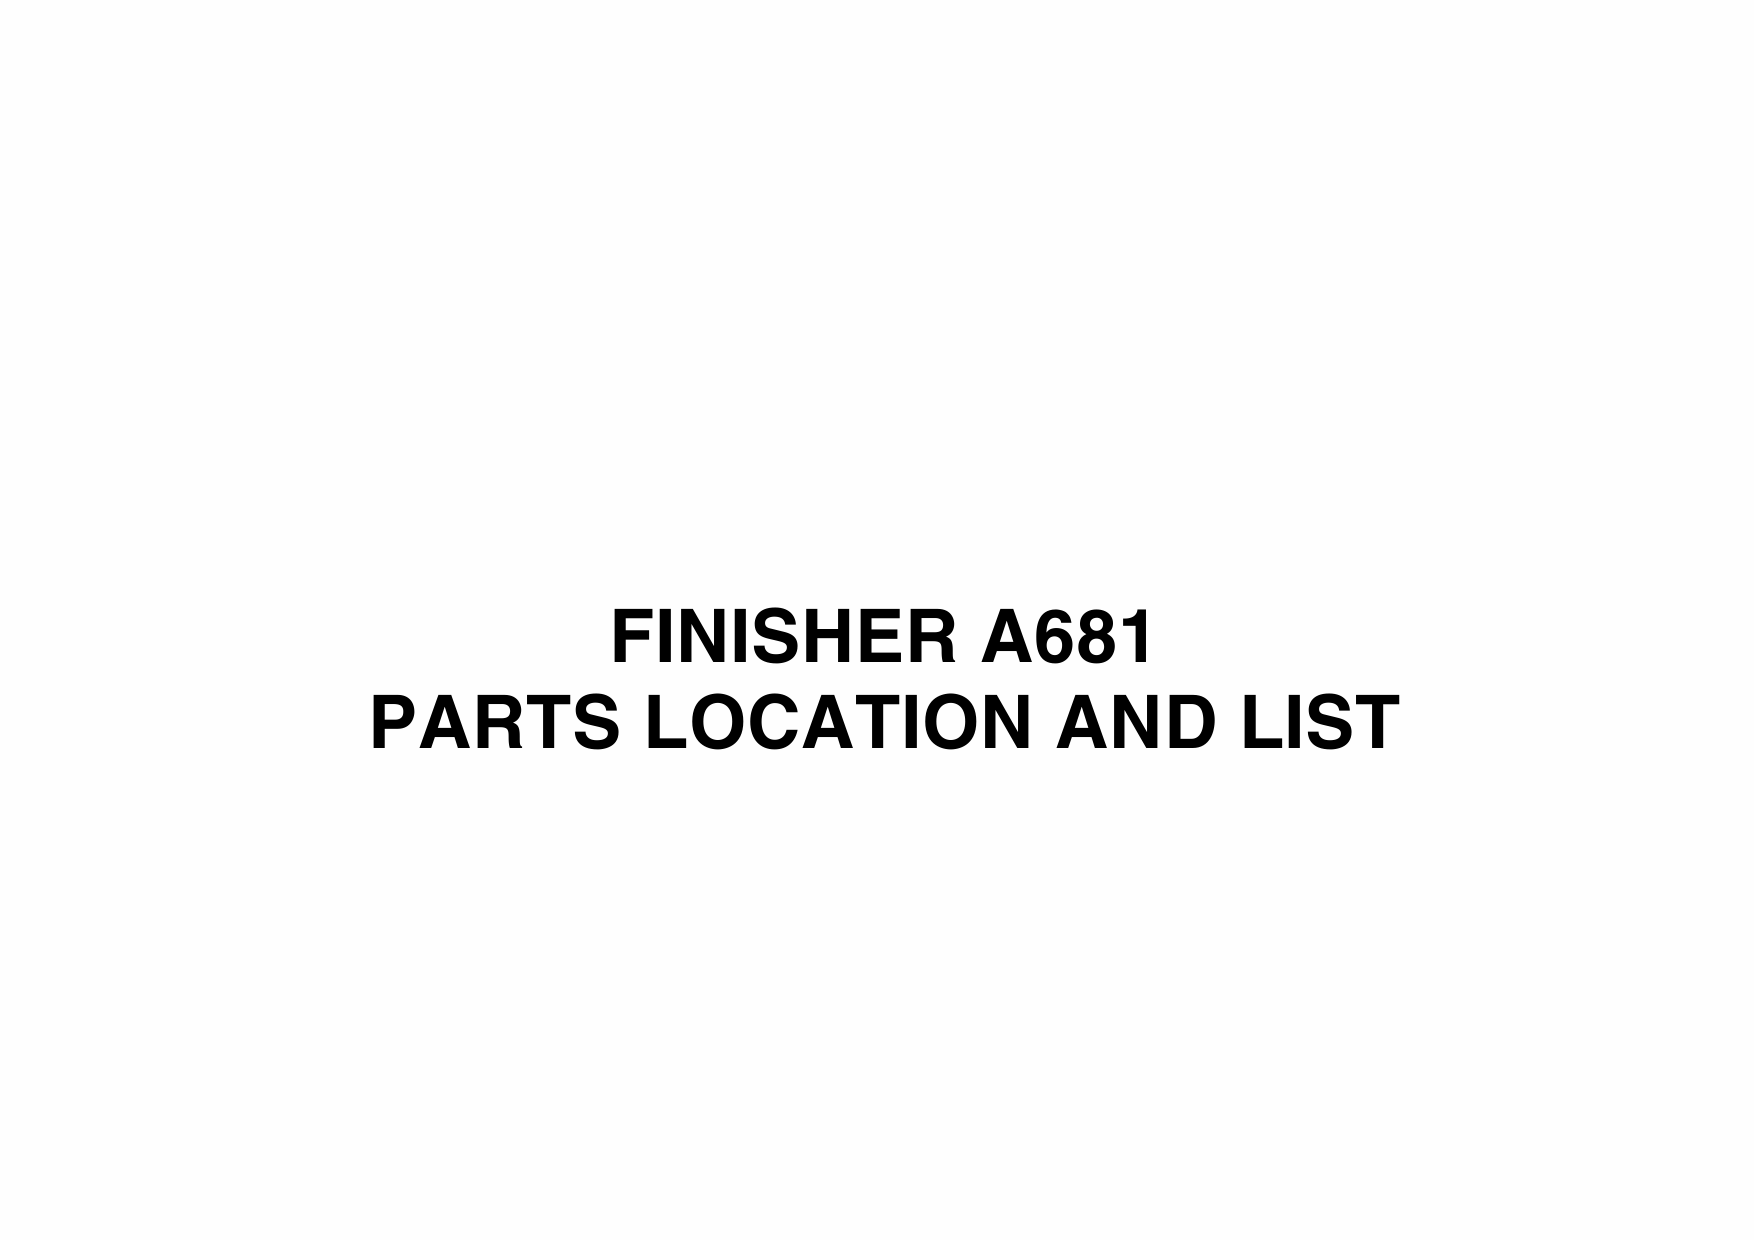 RICOH Options A681 FINISHER Parts Catalog PDF download-1